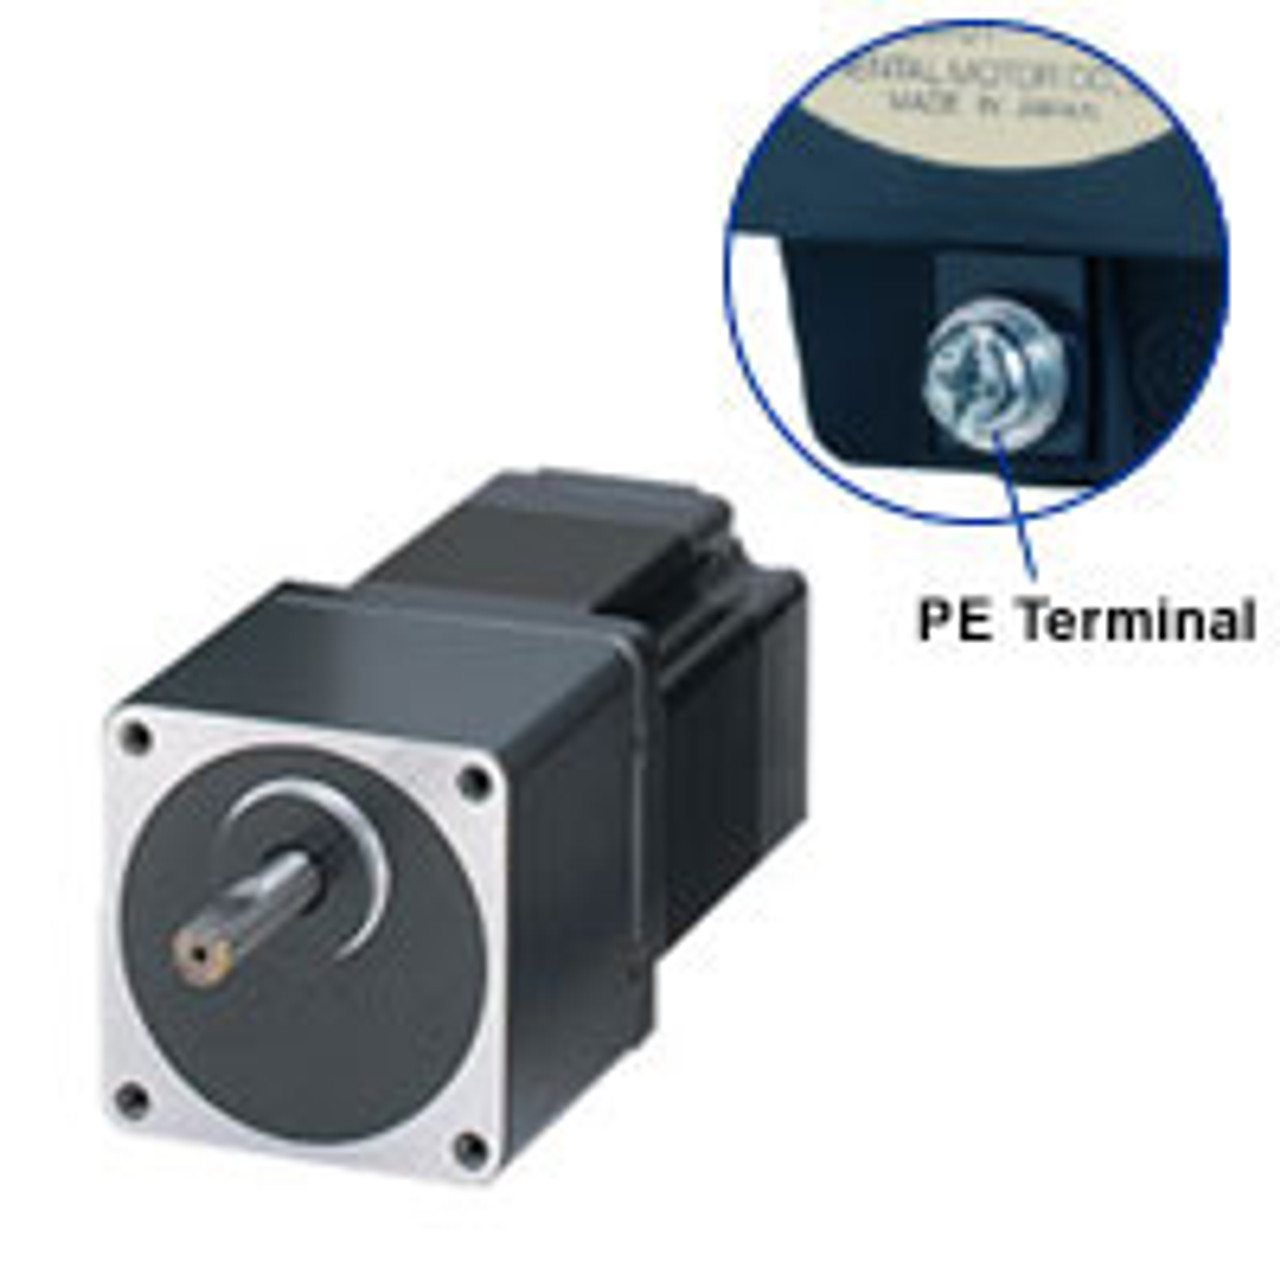 PK596BE-T7.2 - Product Image